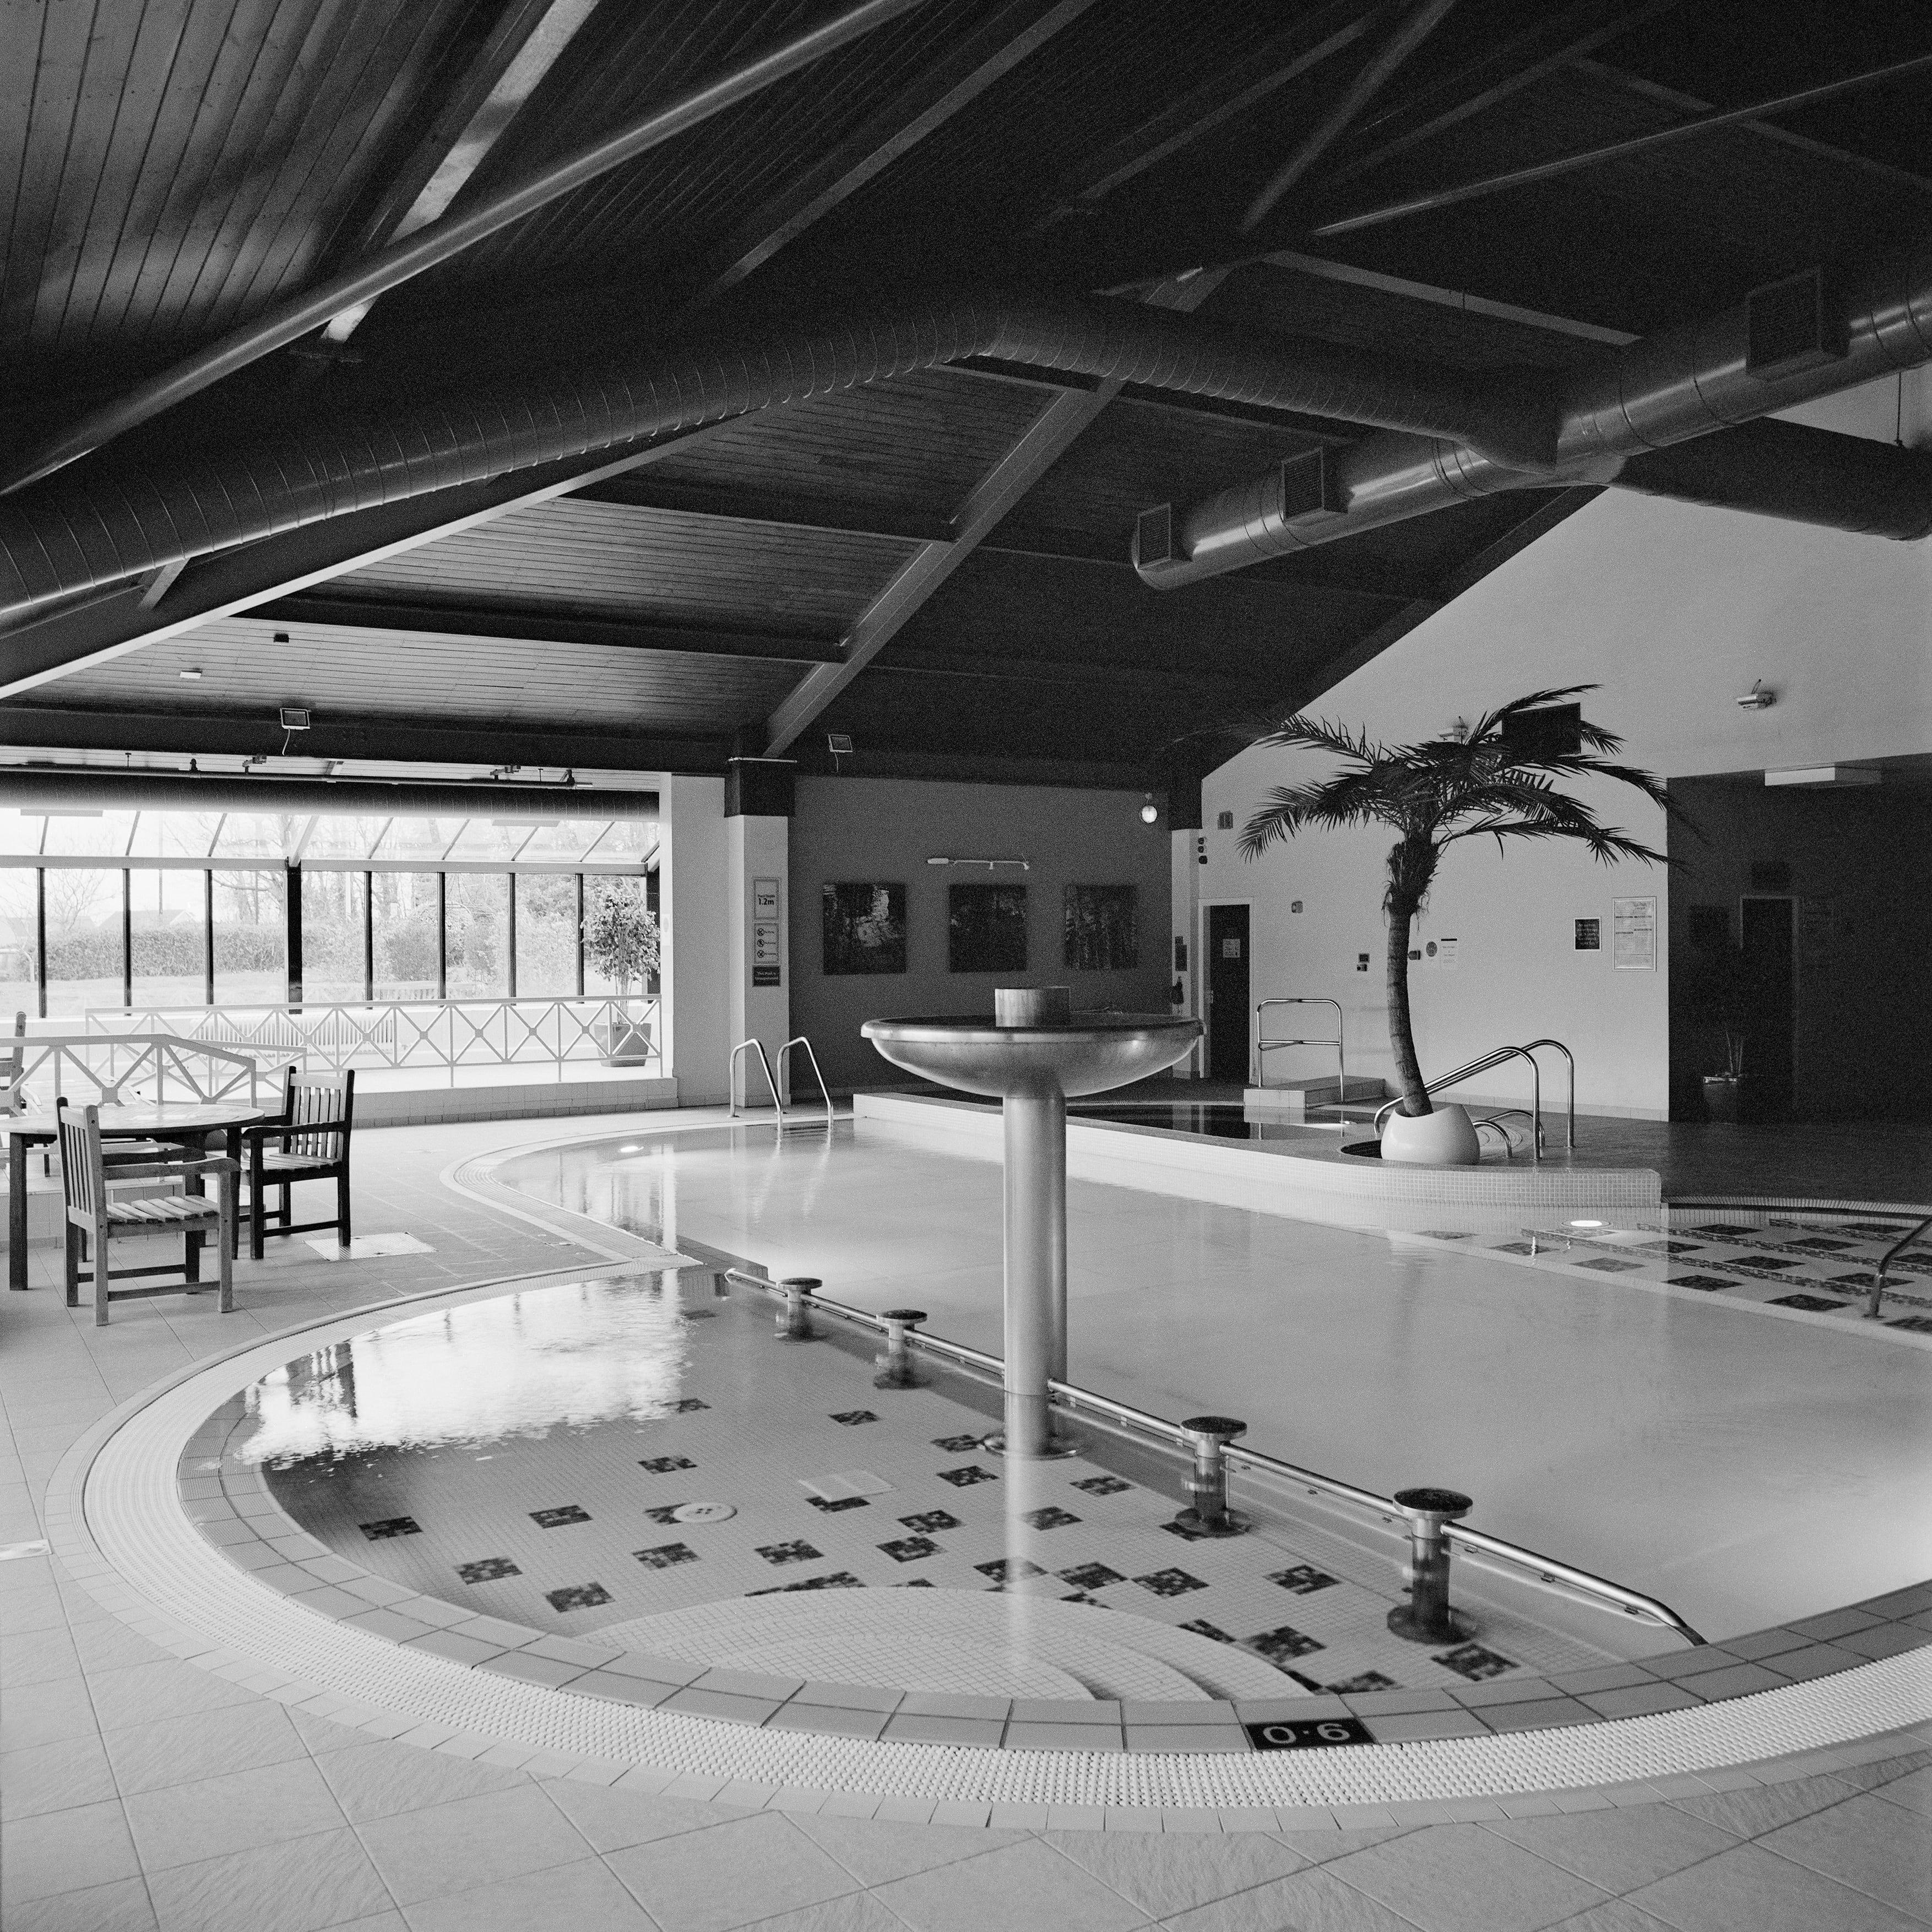 Anna Dobrovolskaya-Mints Black and White Photograph - Monochrome Square Architectural Photography: Swimming Pool Design with Fountain